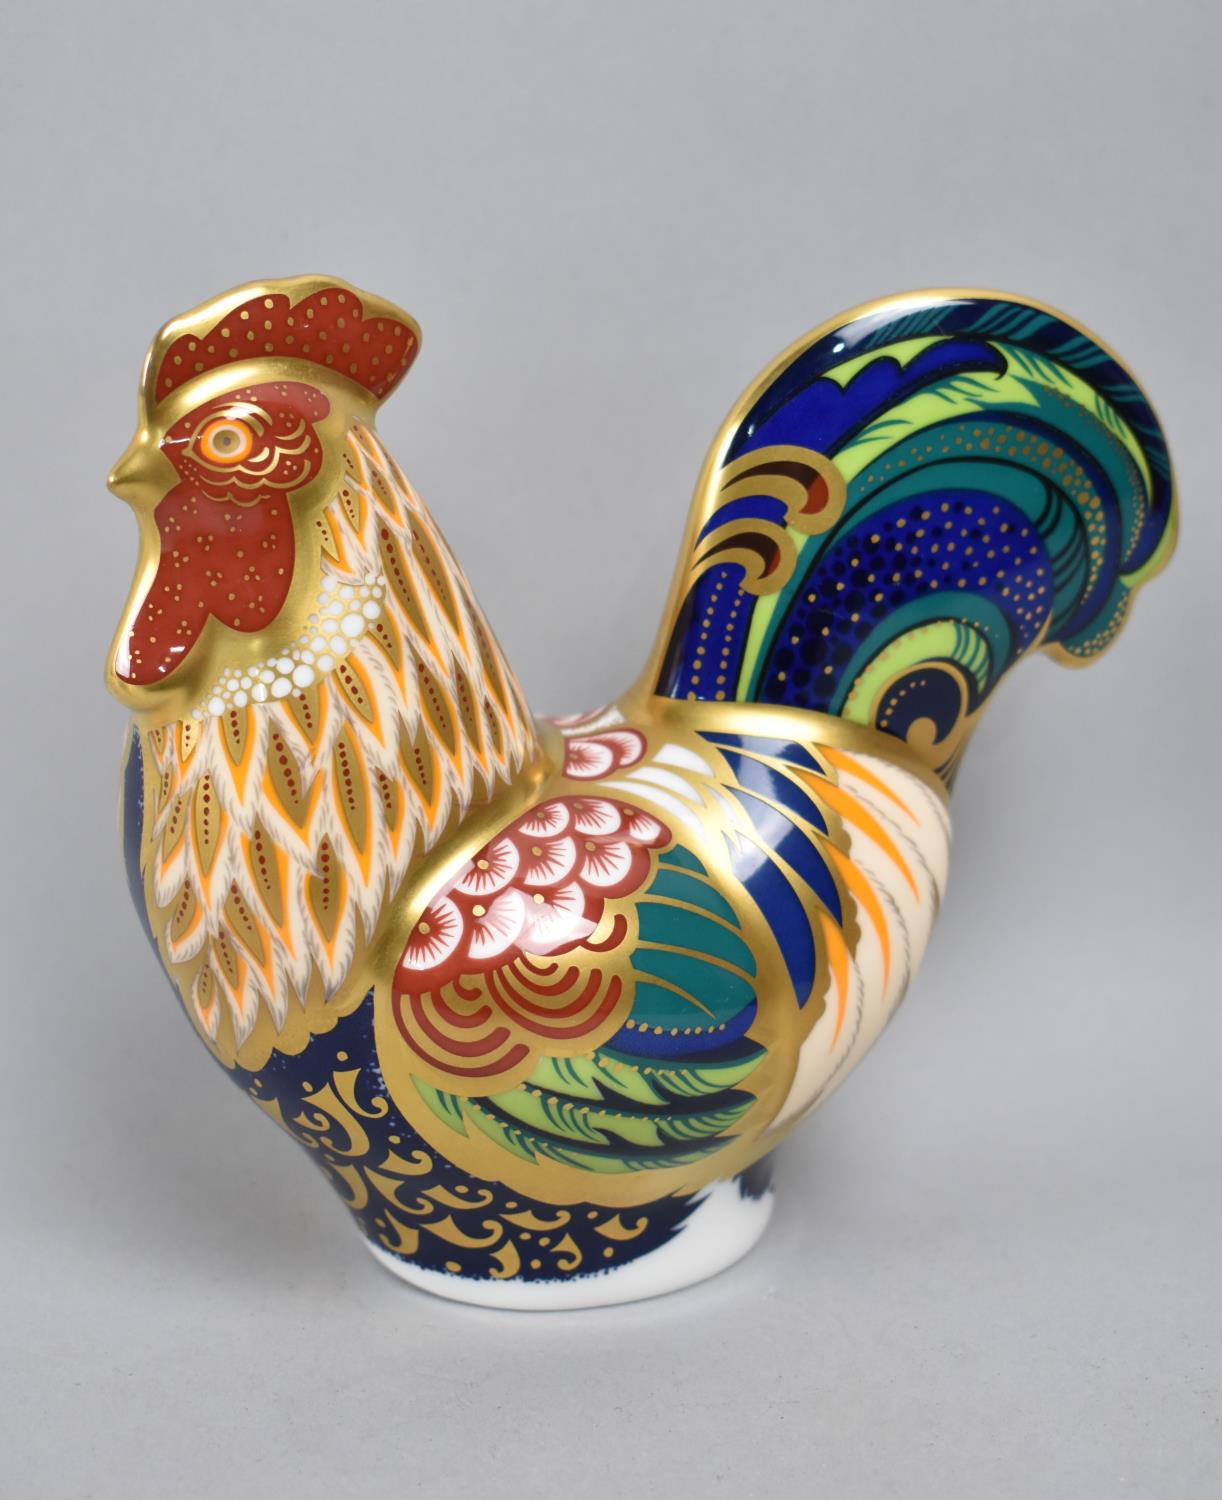 A Limited Edition Royal Crown Derby Paperweight, Derbyshire Cockerel, no. 20/150